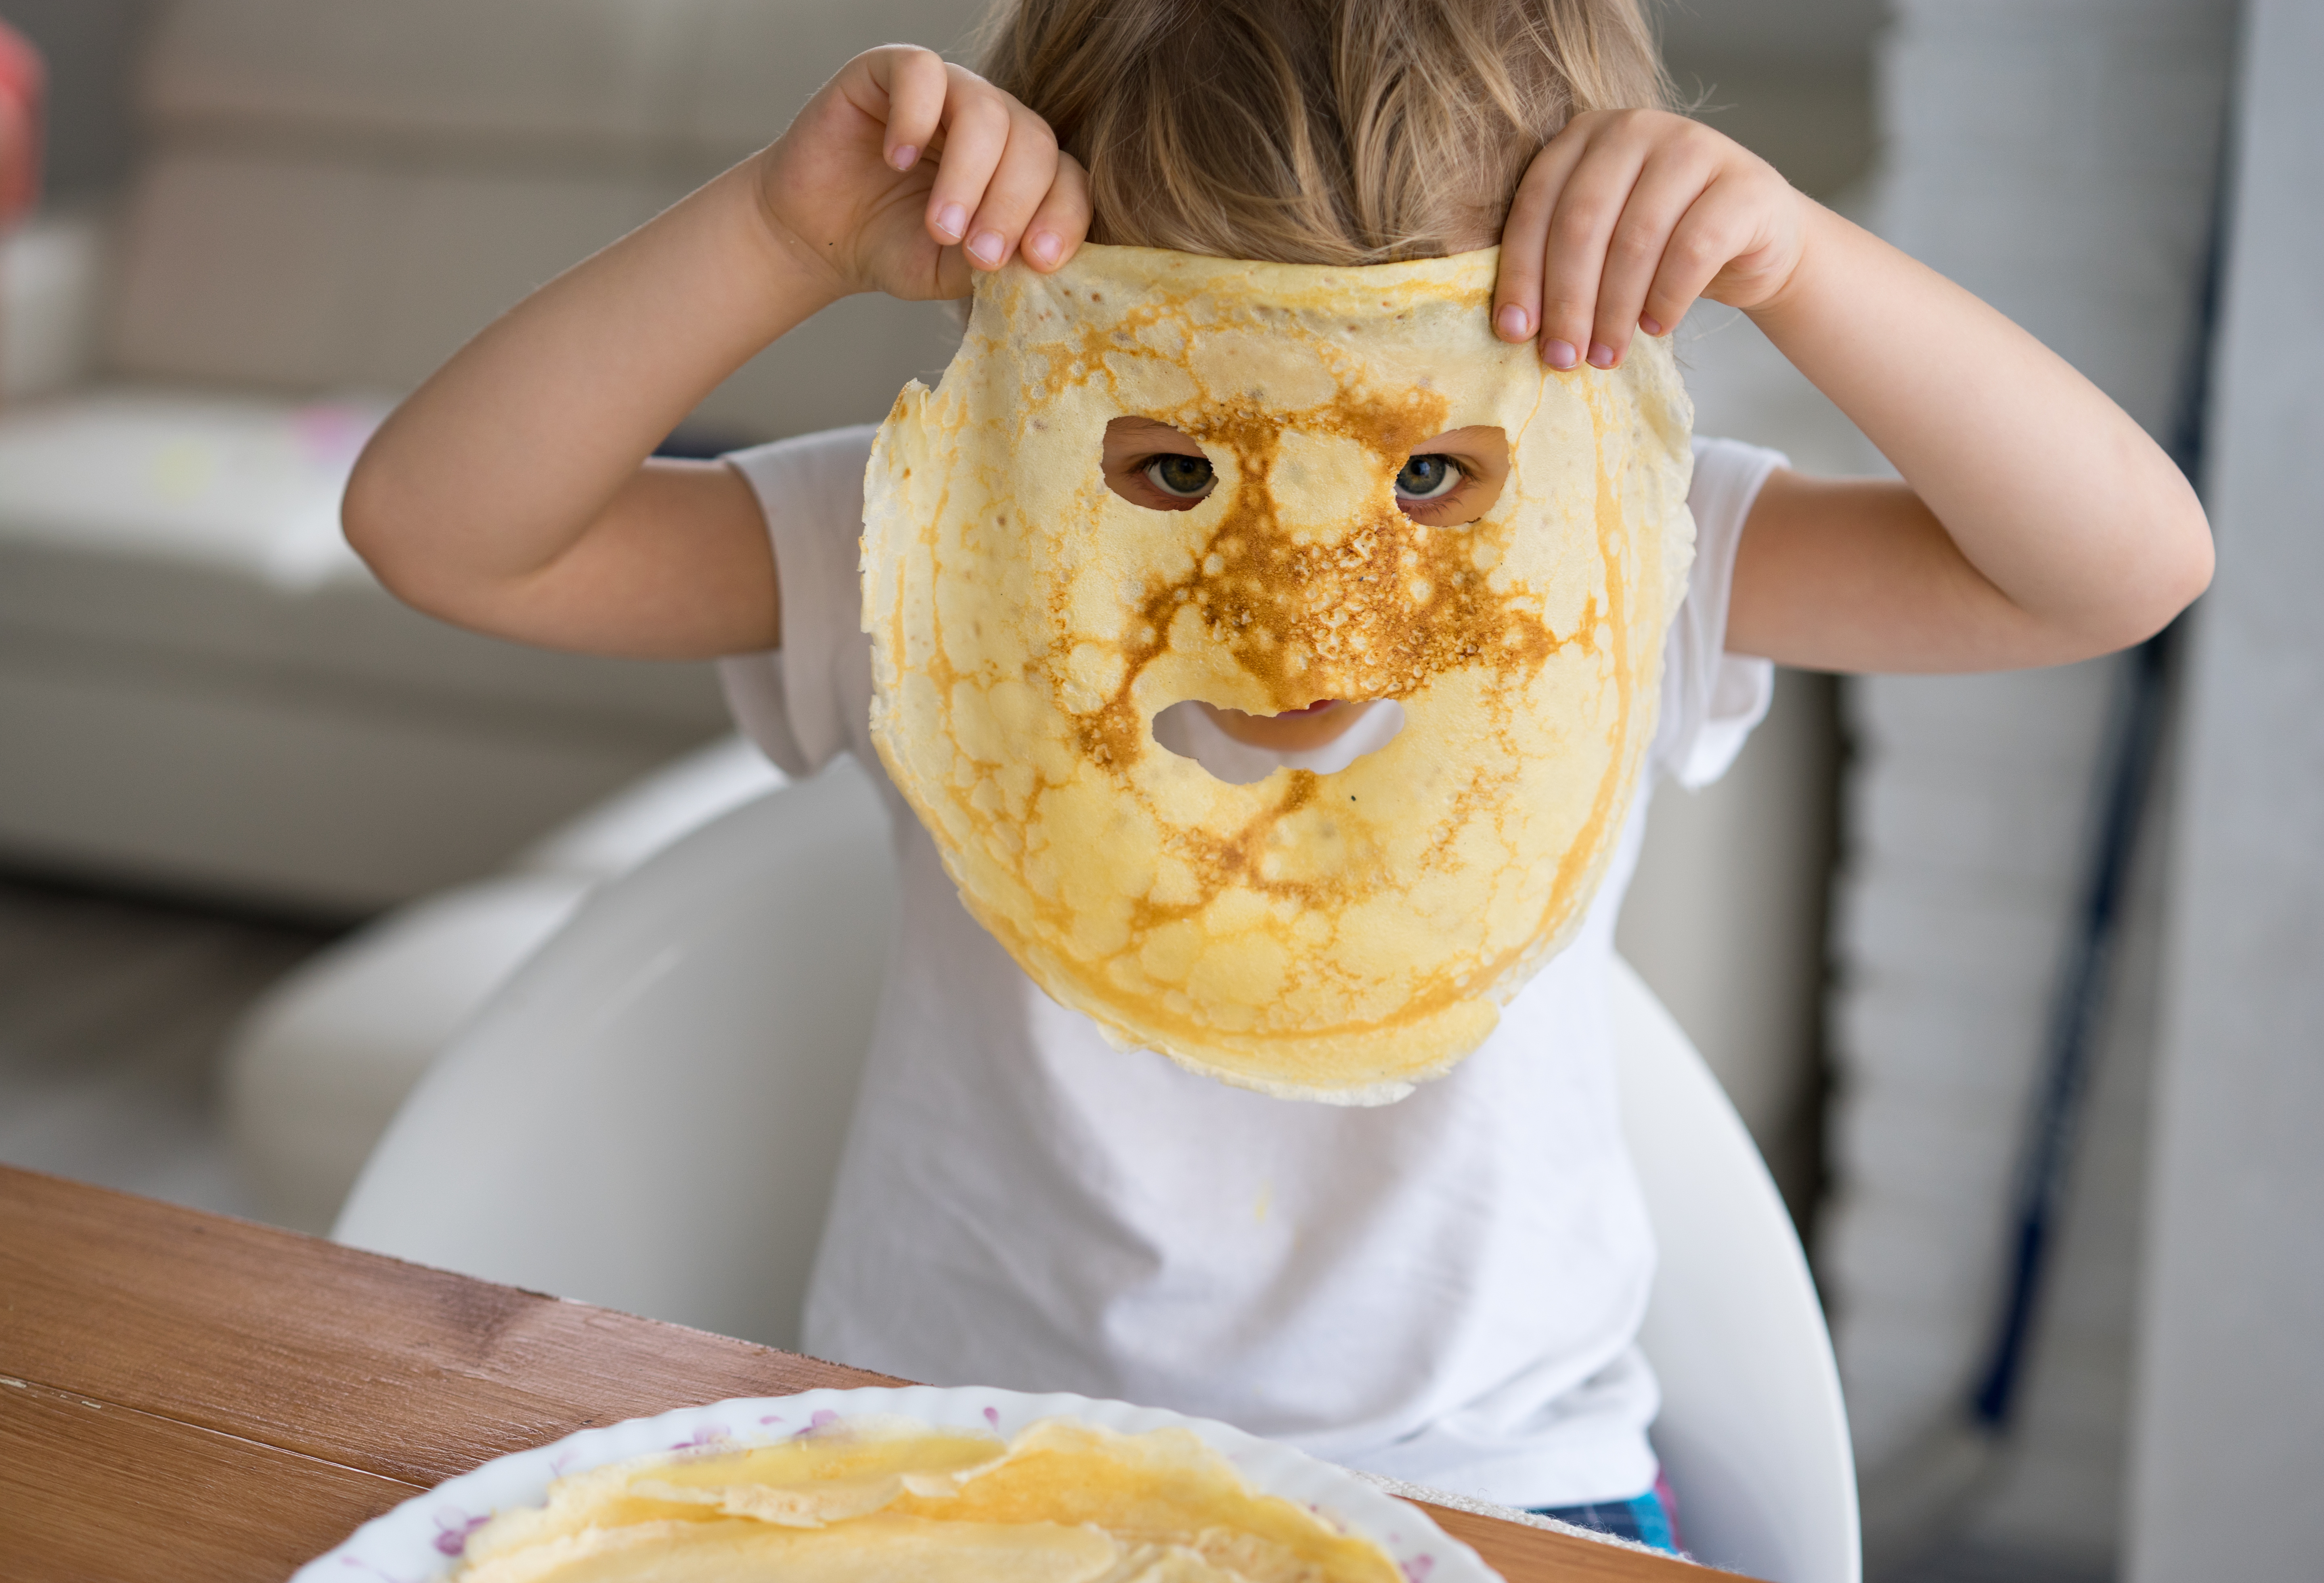 Small boy holding smailey face pancake in his own face